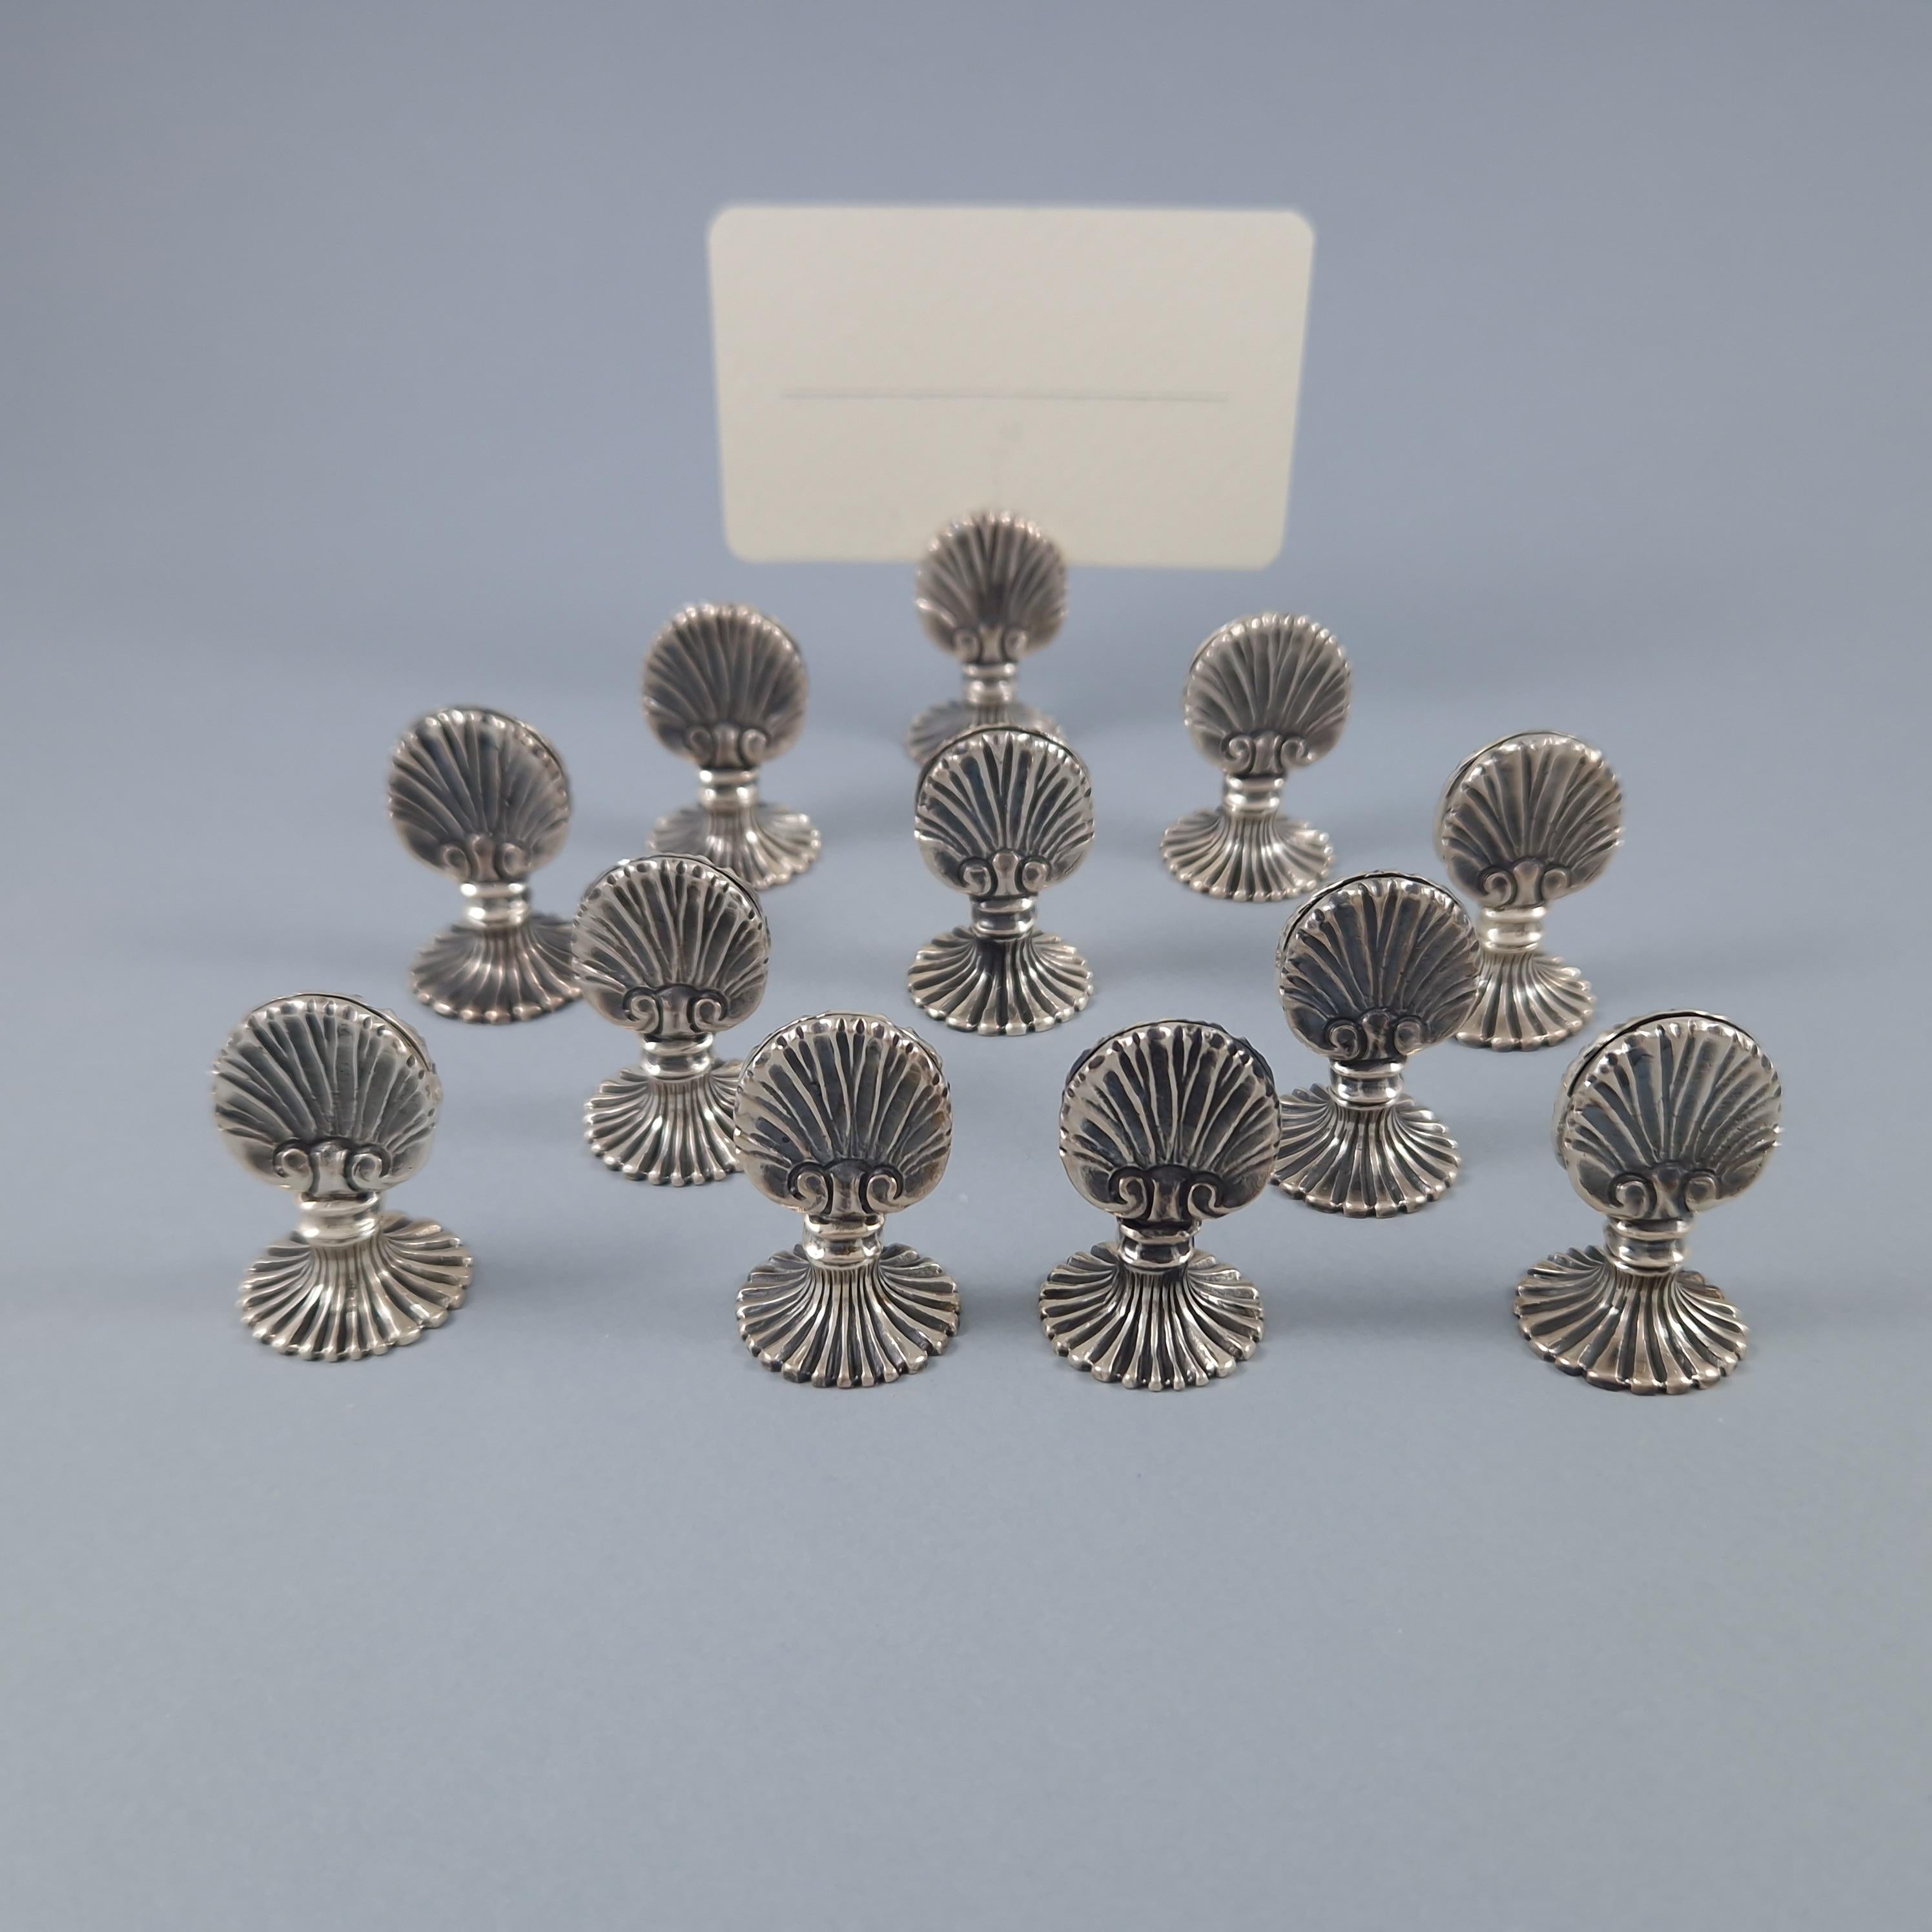 Rare set of 12 sterling silver place card holders in the shape of a shell 

Italian work from the 20th century by Buccellati 
925 silver hallmark and Silversmith's hallmark 
Height: 3.4 cm 
Diameter of the base: 2.1 cm 
Weight: 260 grams
In